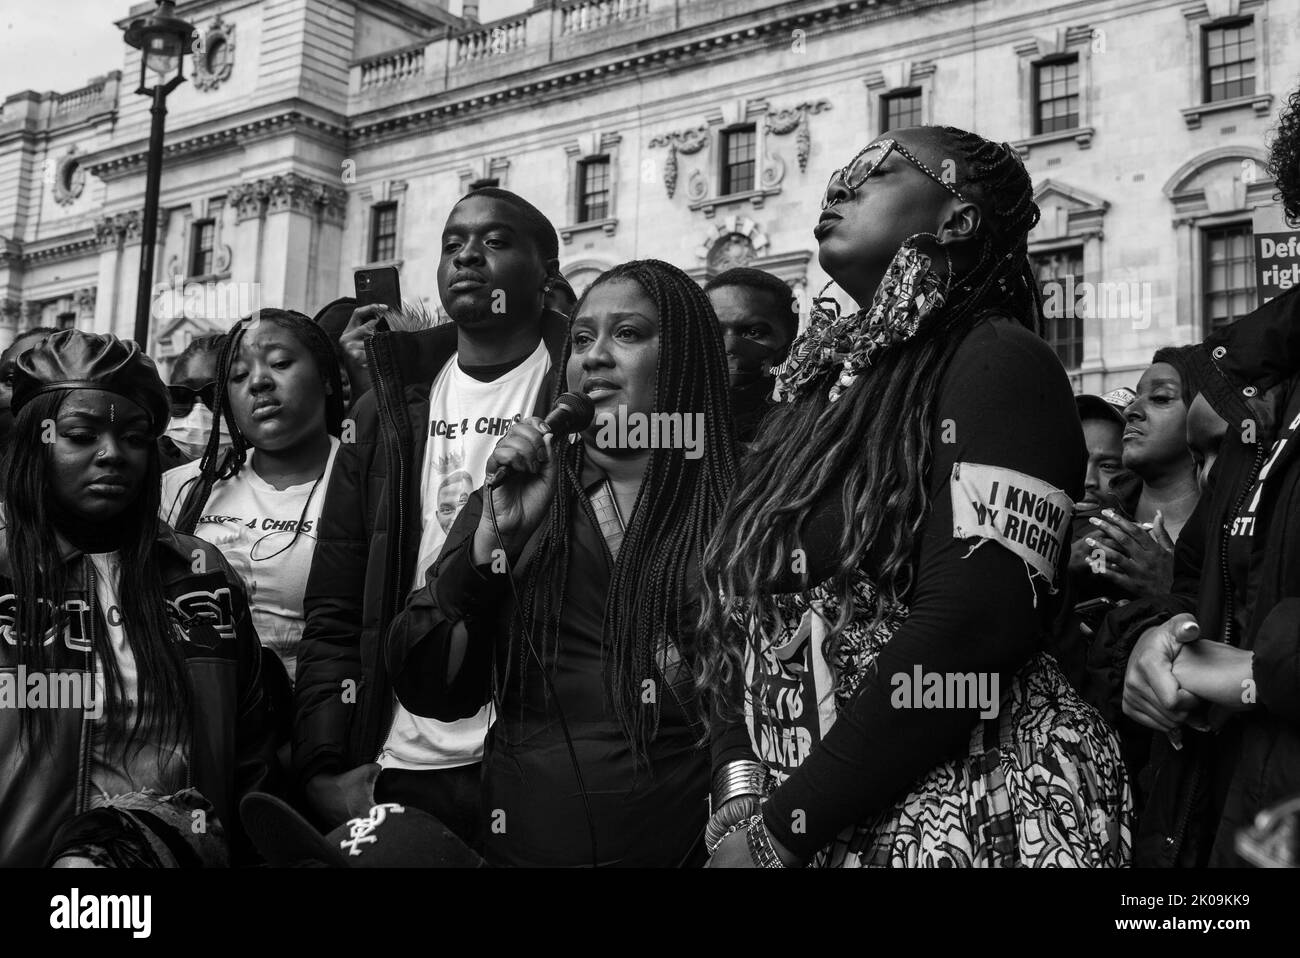 Protestors gathered at Scotland Yard, demanding justice for Chris Kaba who was fatally shot by the police in Streatham, London. Stock Photo